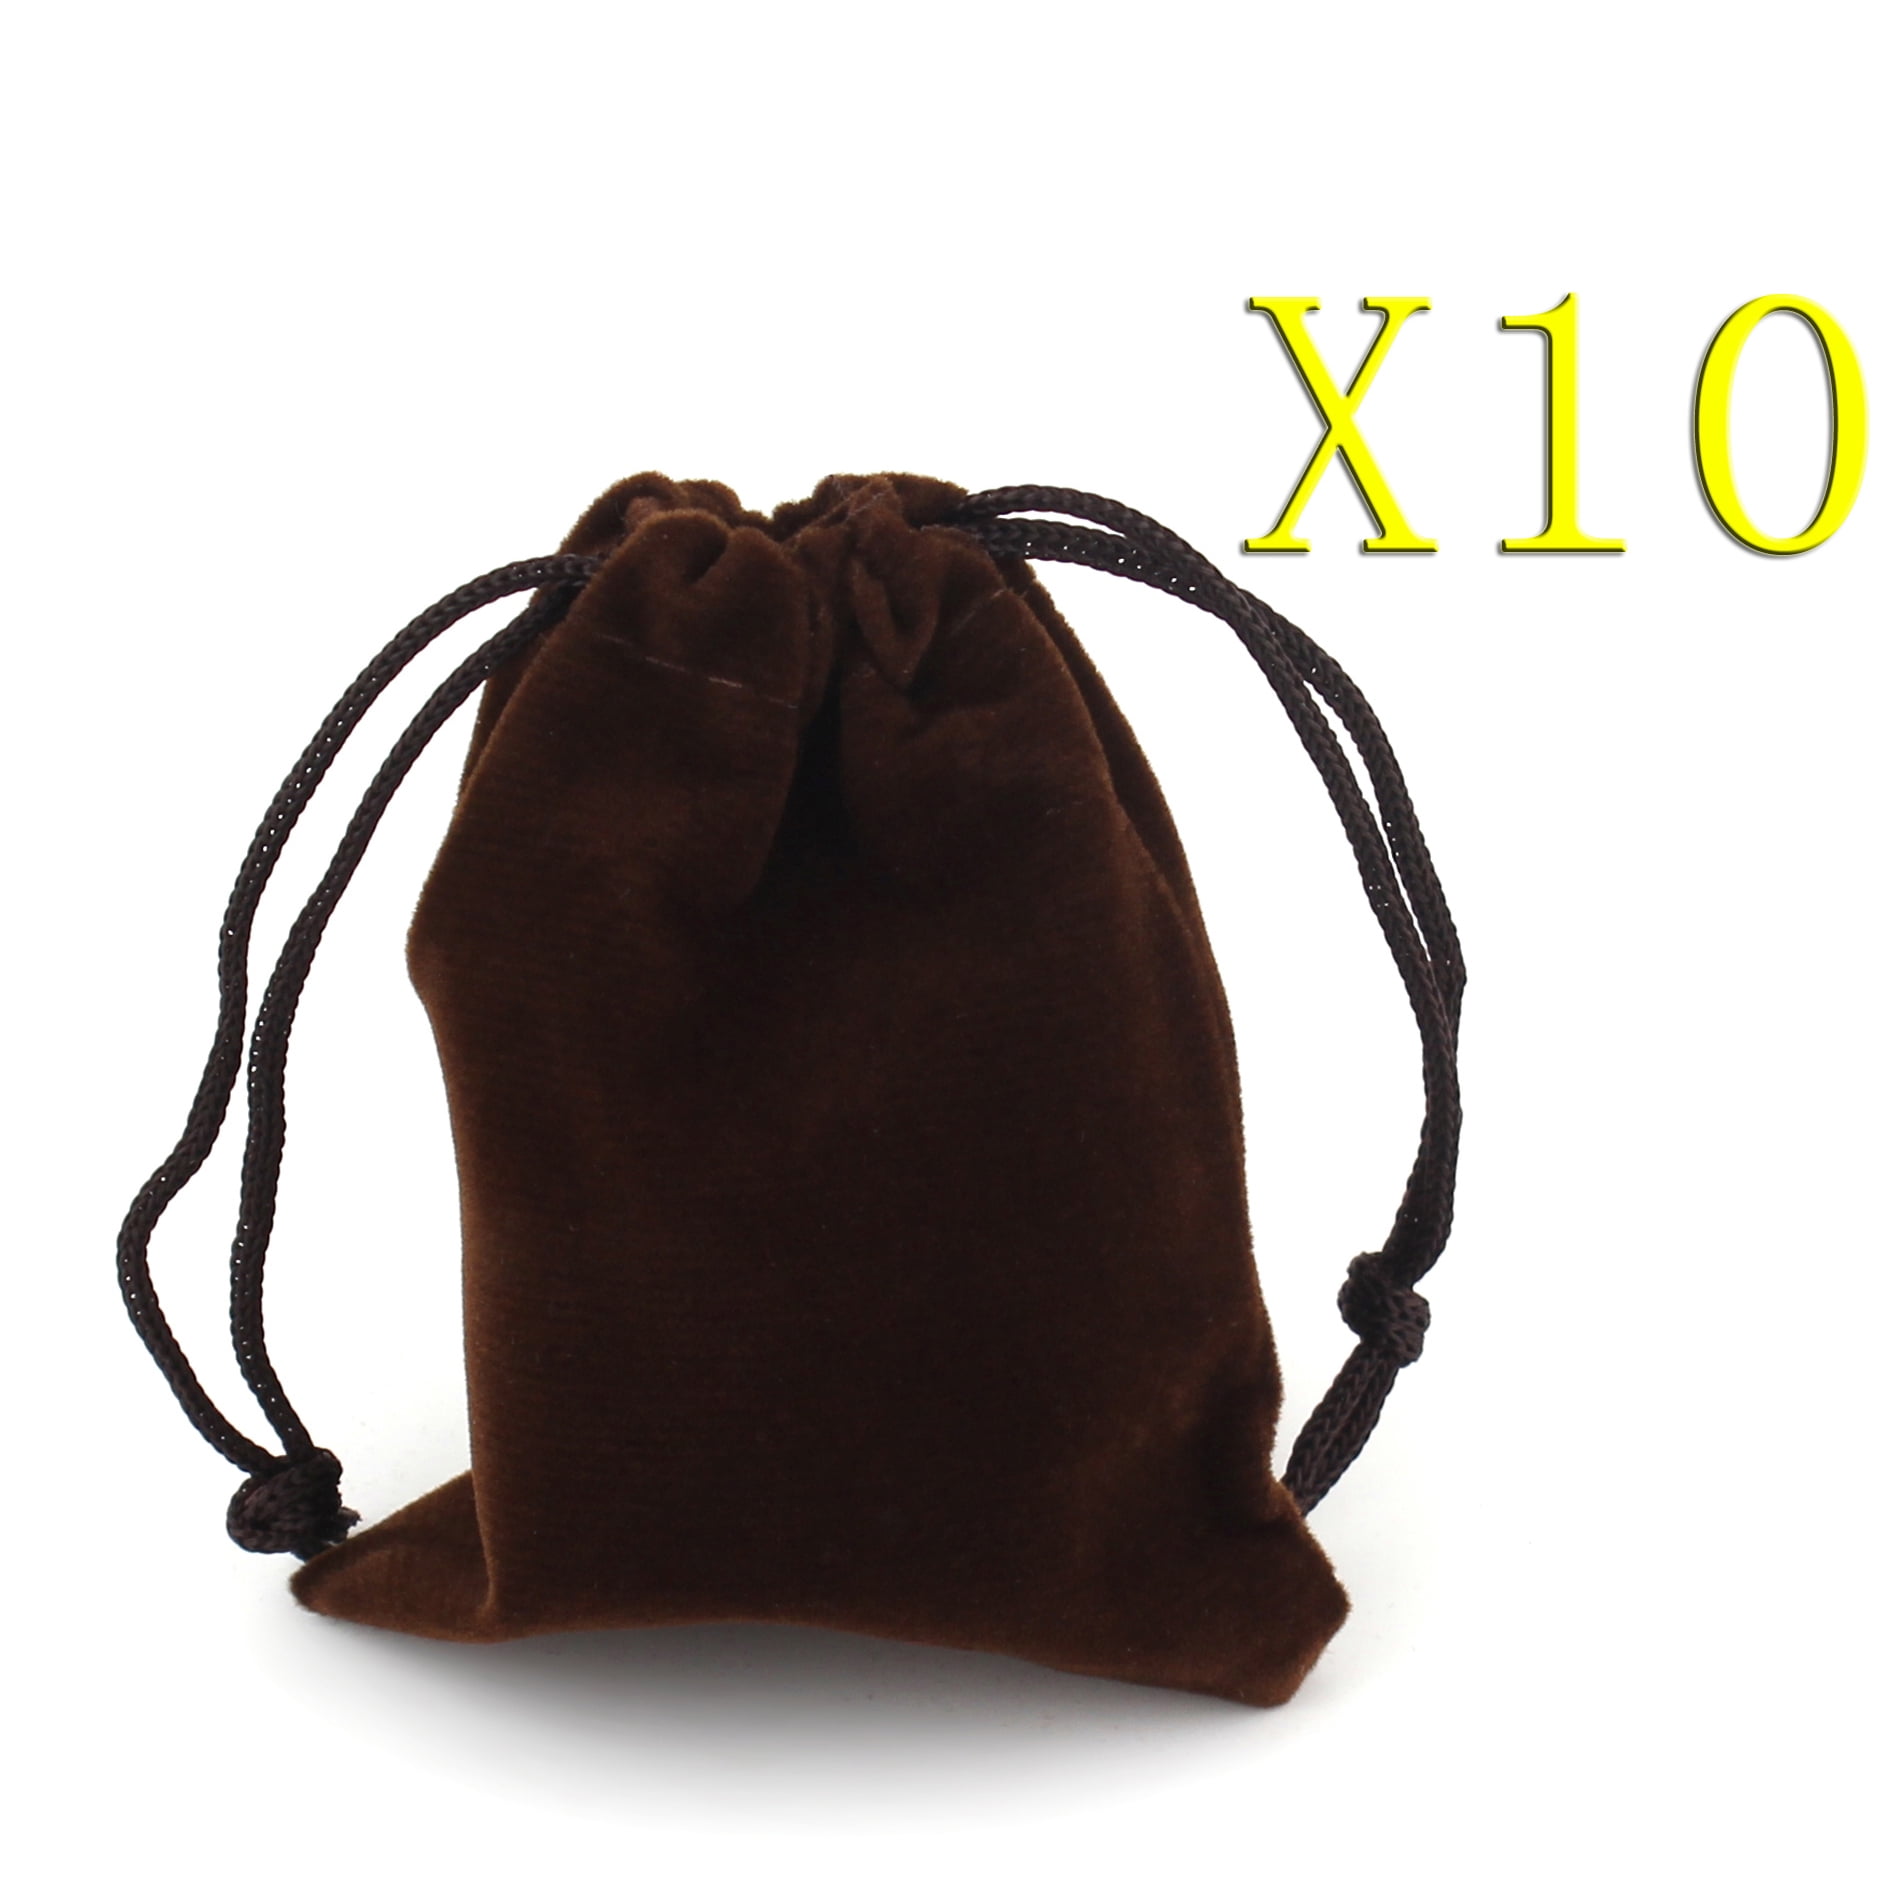 Leather bag small aubergine brown with red-brown glass bead for children suede drawstring for hanging bag with glass bead